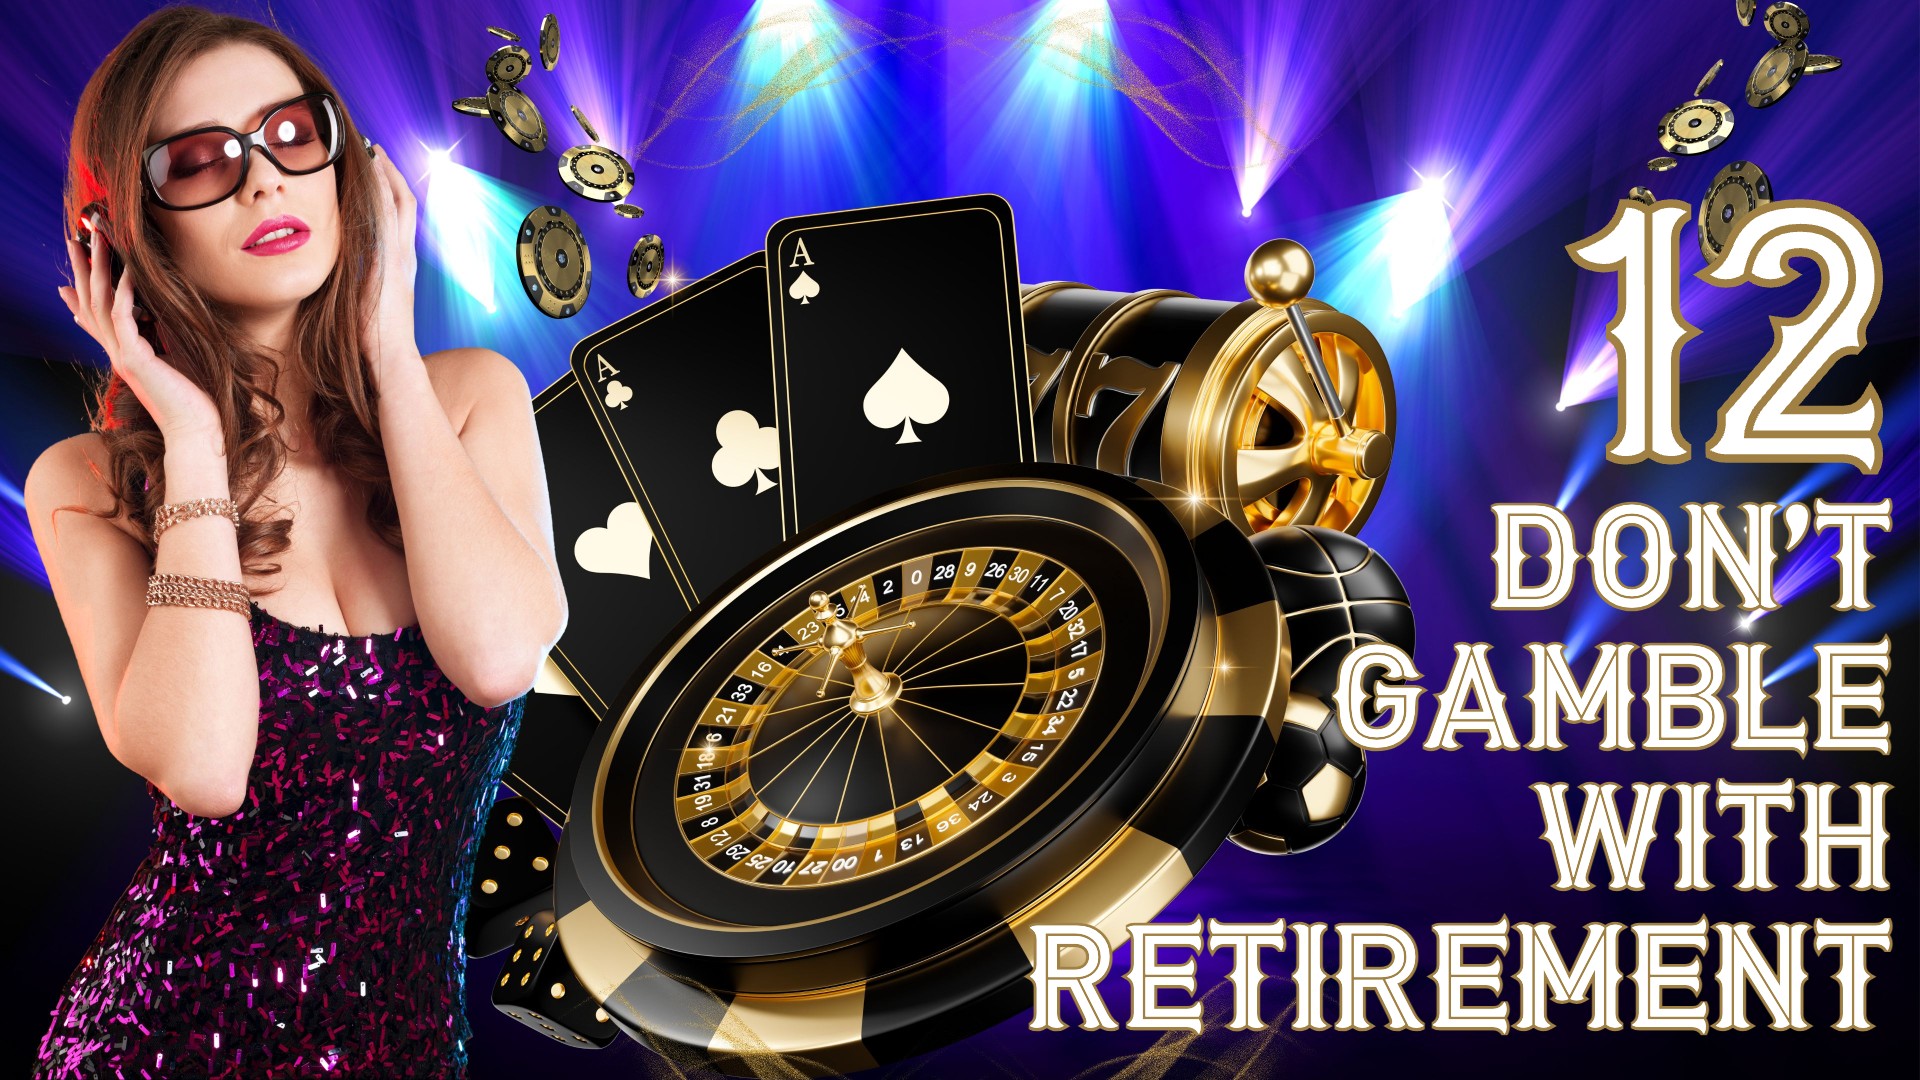 Don’t Gamble with Retirement 12